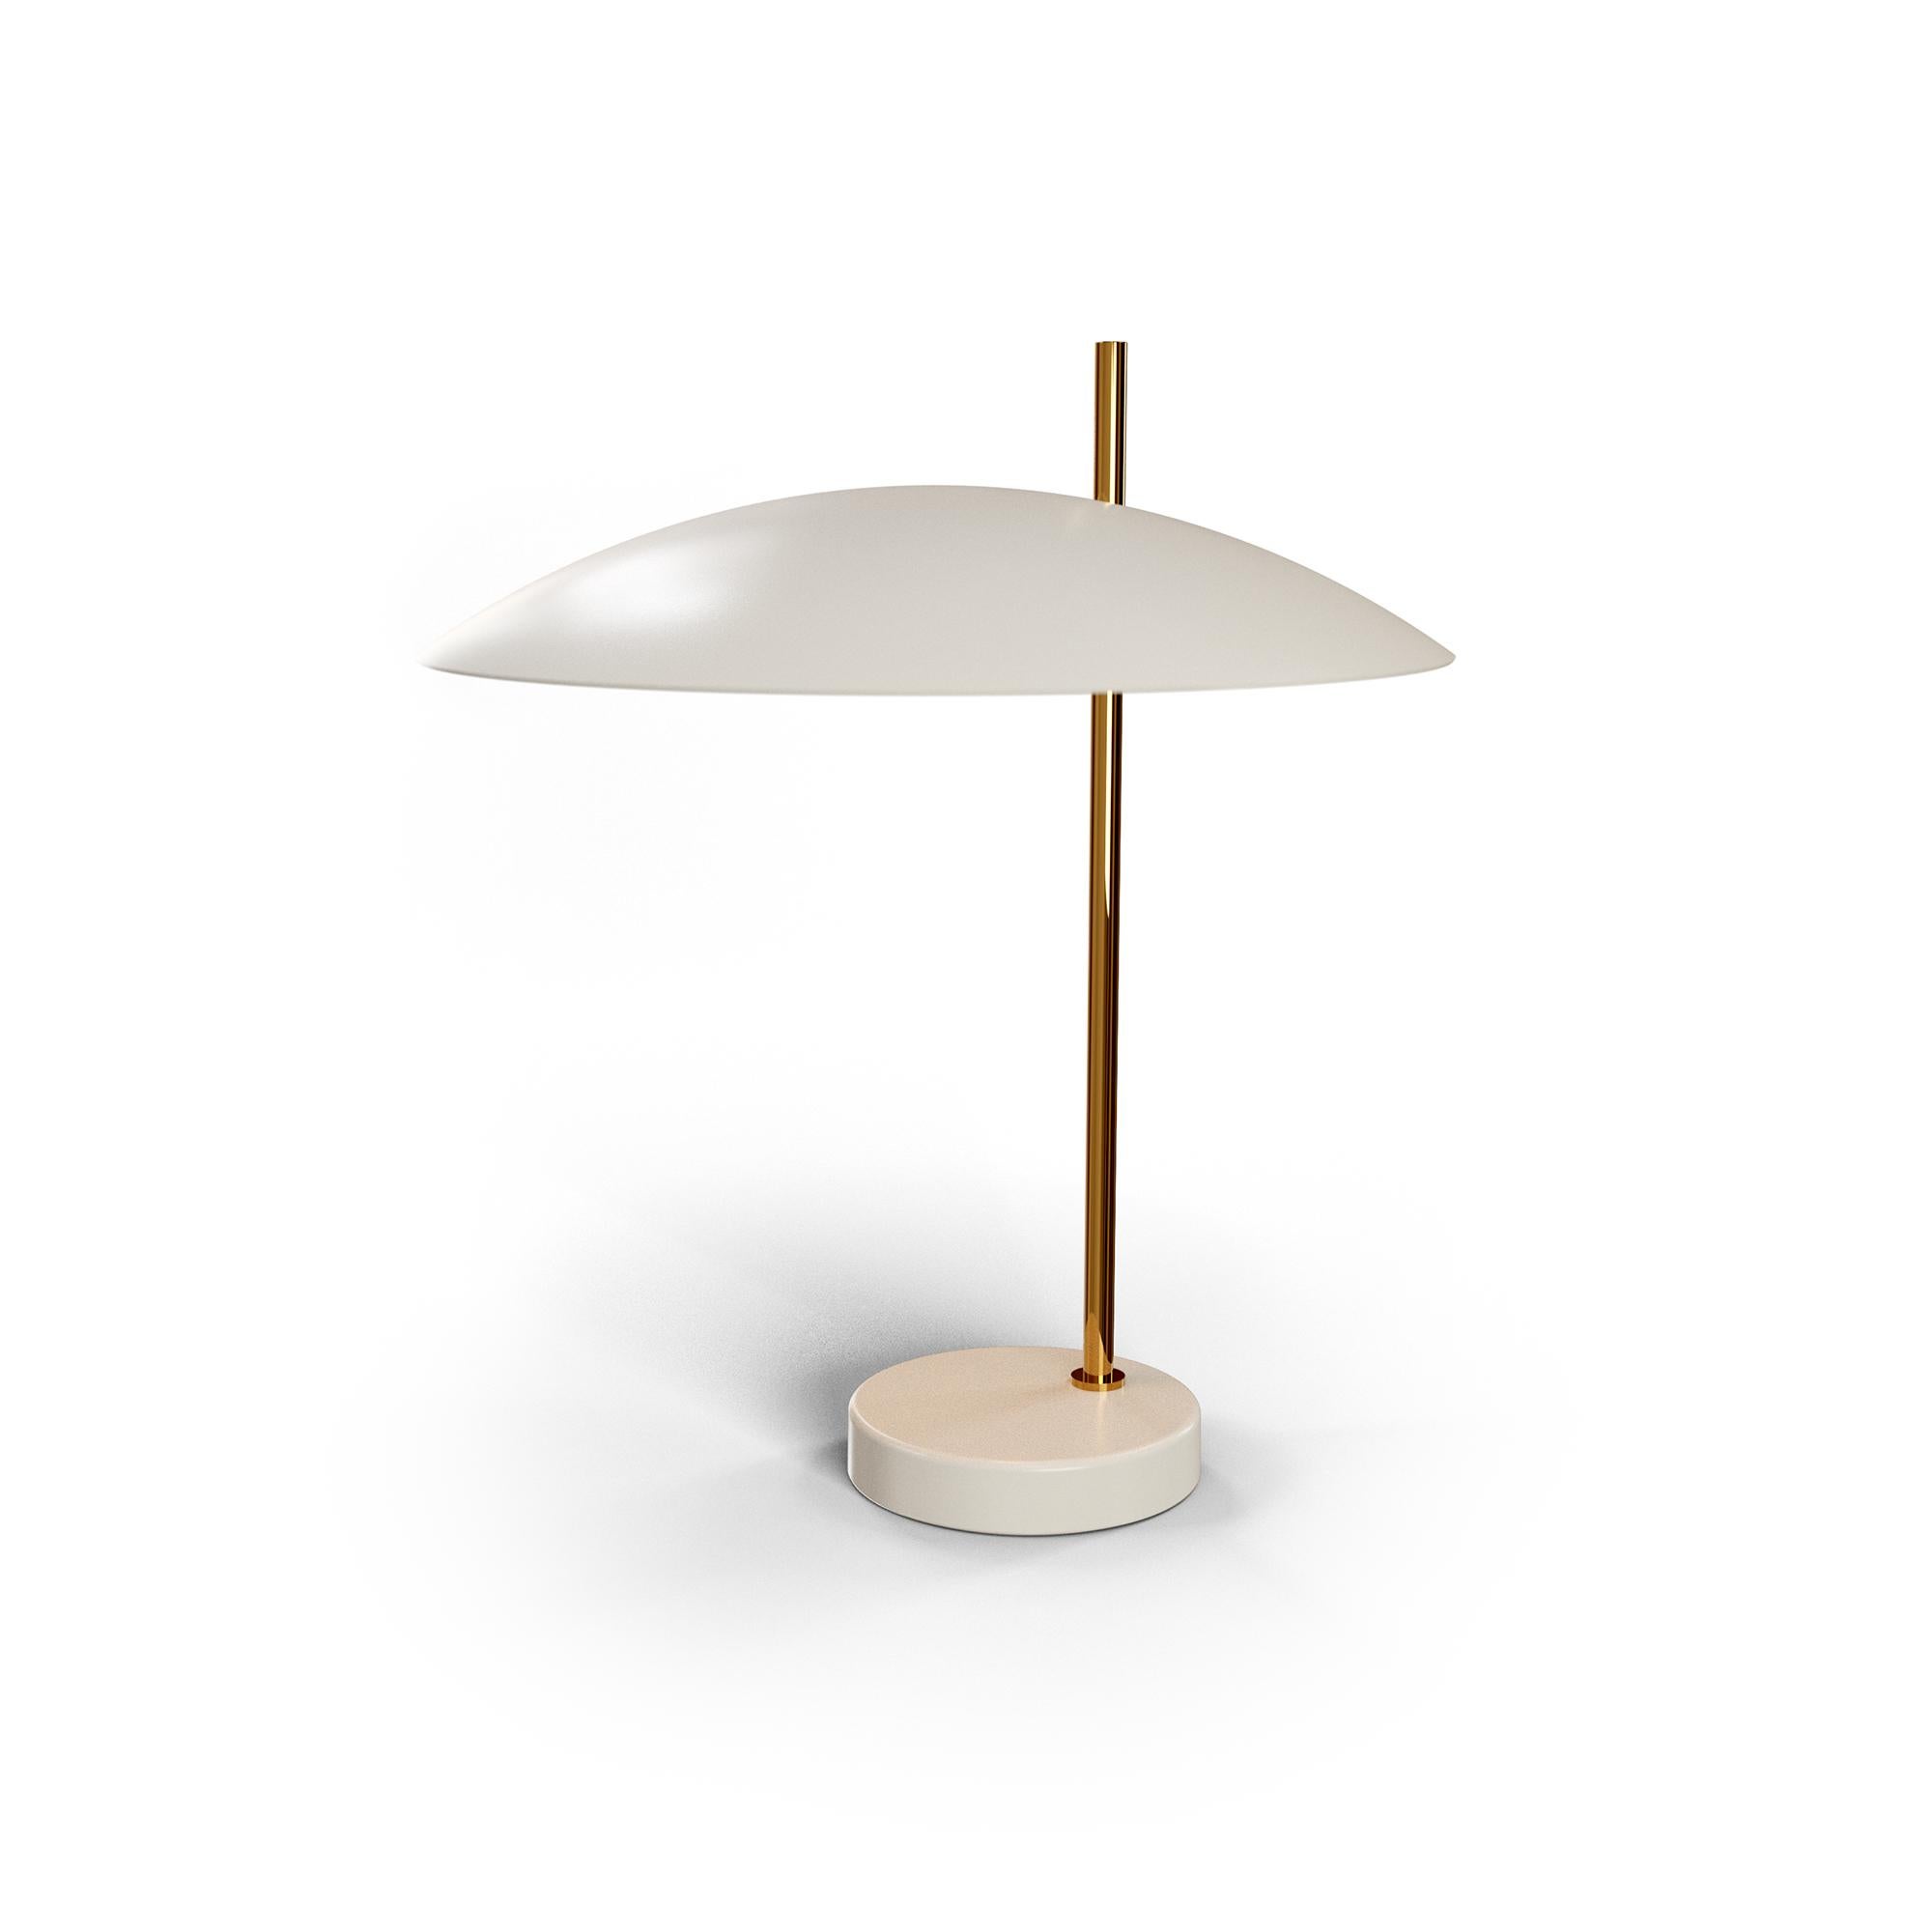 Brushed Brass 1013 Table Lamp by Disderot
Limited Edition. 
Designed by Pierre Disderot.
Dimensions: Ø 34,1 x H 39,77 cm.
Materials: Brushed brass and white metal.

Delivered with authentication certificate. Made in France. Available in brushed